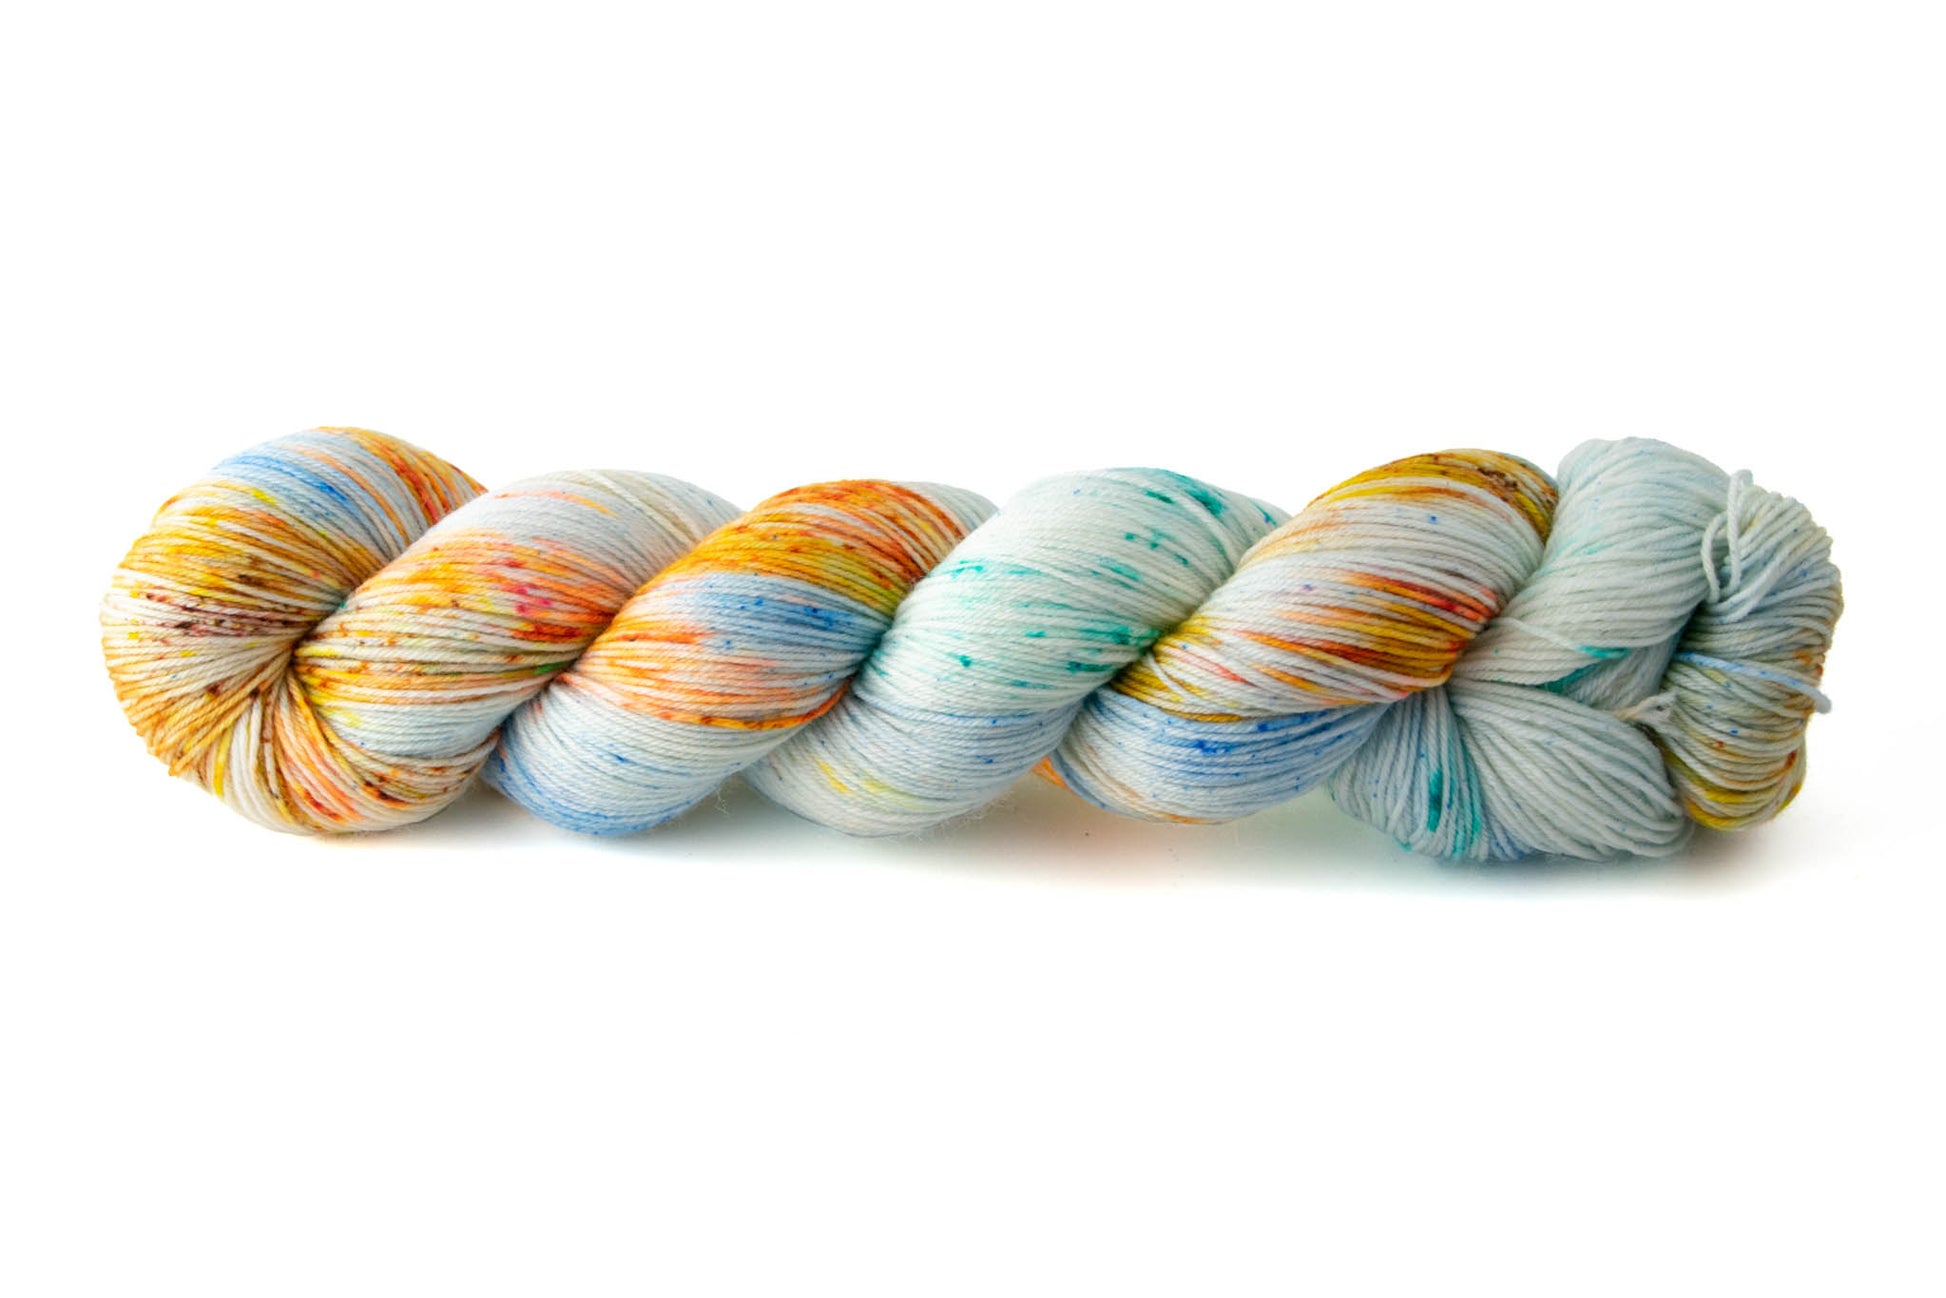 A speckled skein with sections of orange and yellow, aqua and blue, and tiny bits of red-brown on a white background.